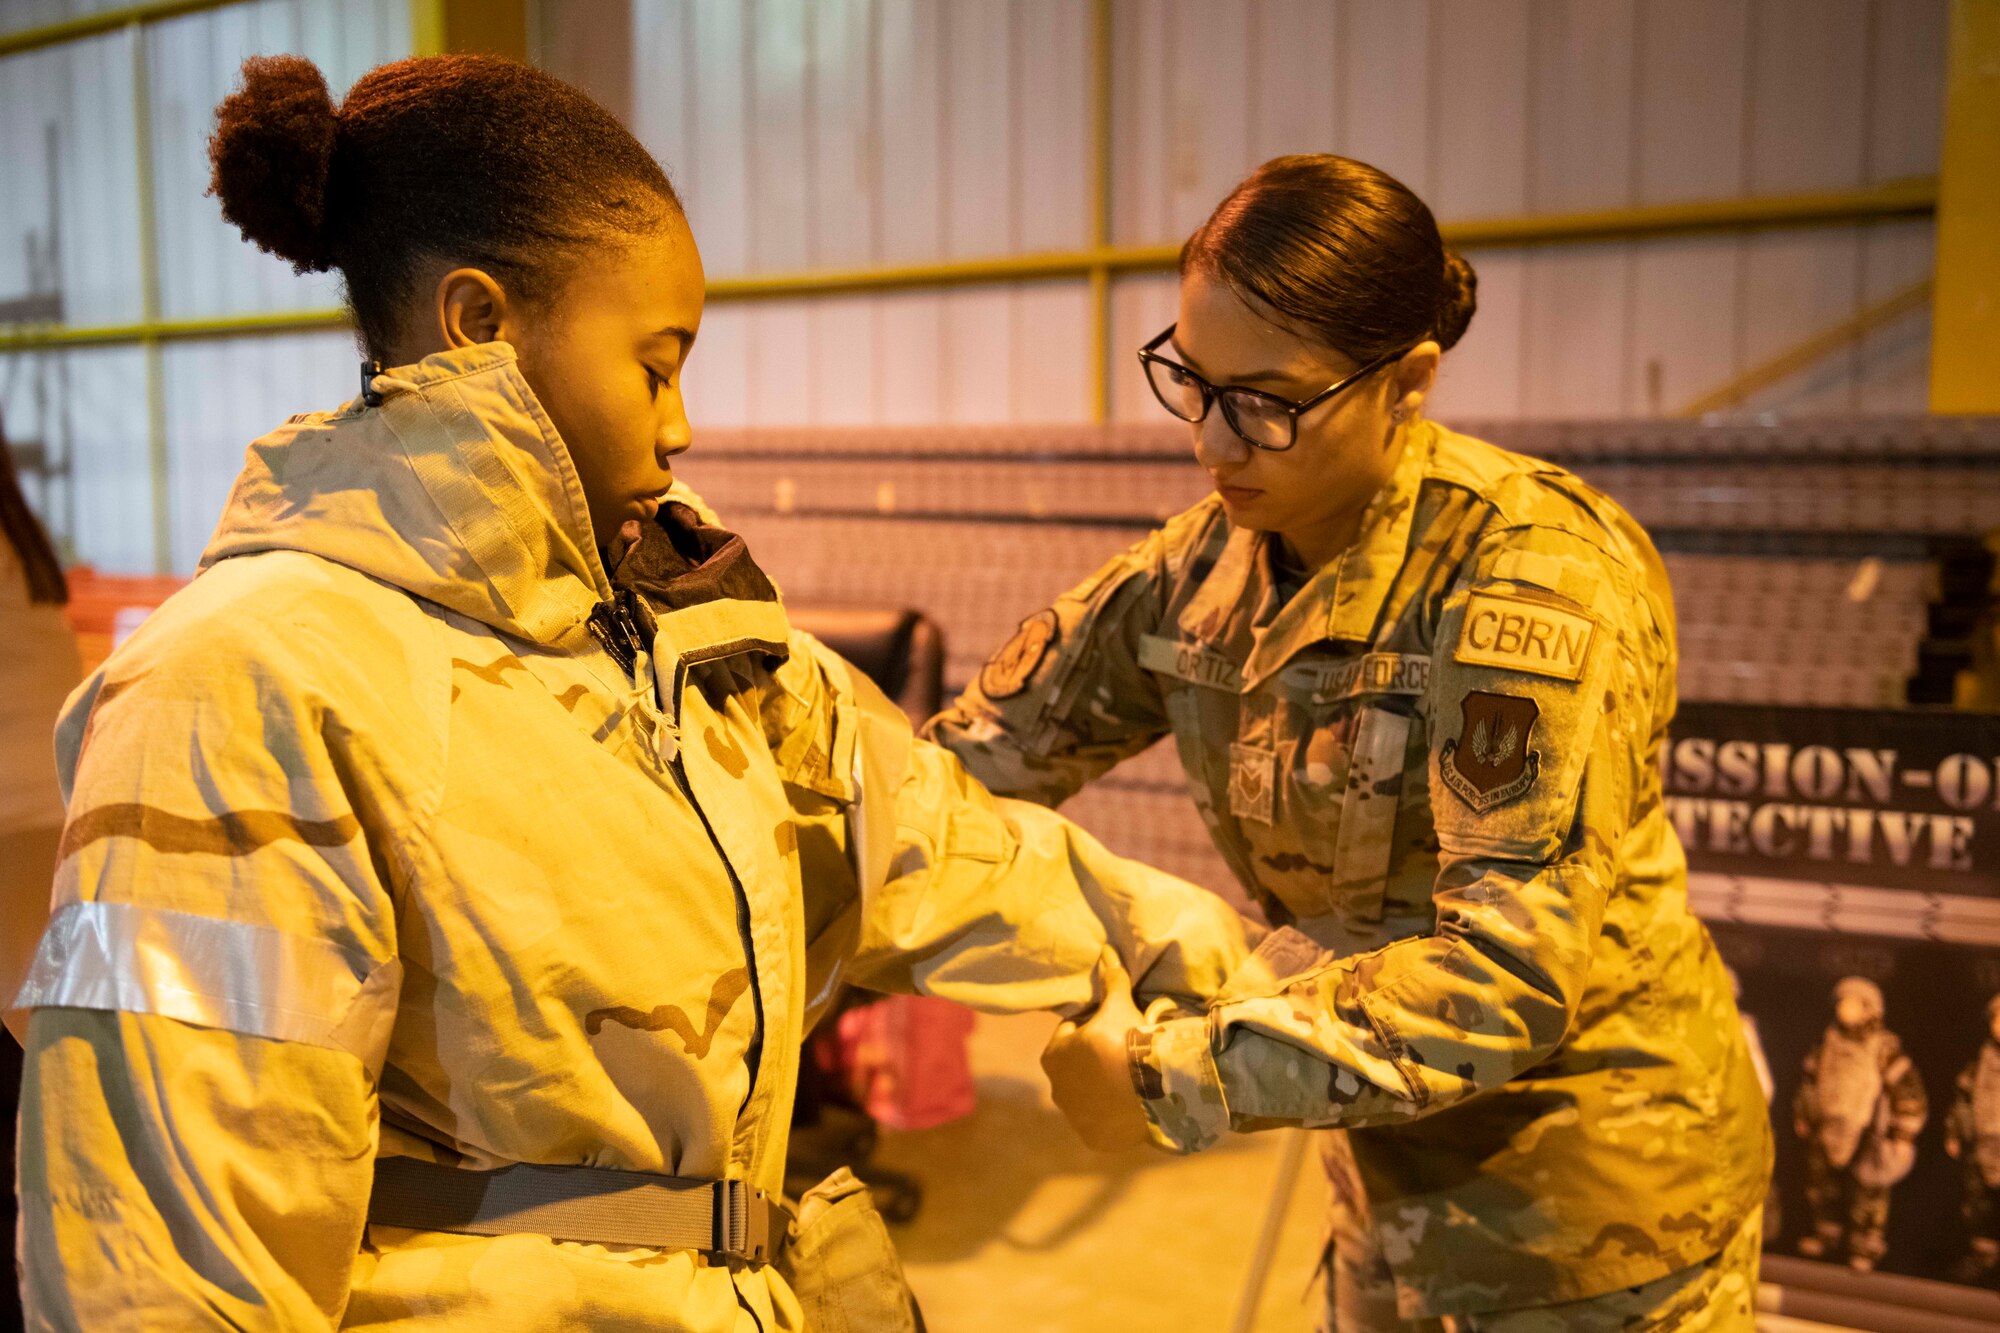 U.S. Air Force Staff Sgt. Ashley Ortiz, right,  423d Civil Engineer Squadron emergency management NCO in charge of plans and operations, assists a 501st Combat Support Wing member with their Mission Oriented Protective Posture gear during Ability to Survive and Operate training at RAF Alconbury, England, Aug. 26, 2021. Airmen participated in the ATSO rodeo to get a refresher on how to properly utilize their MOPP gear in a potential chemical environment. (U.S. Air Force photo by Senior Airman Jennifer Zima)